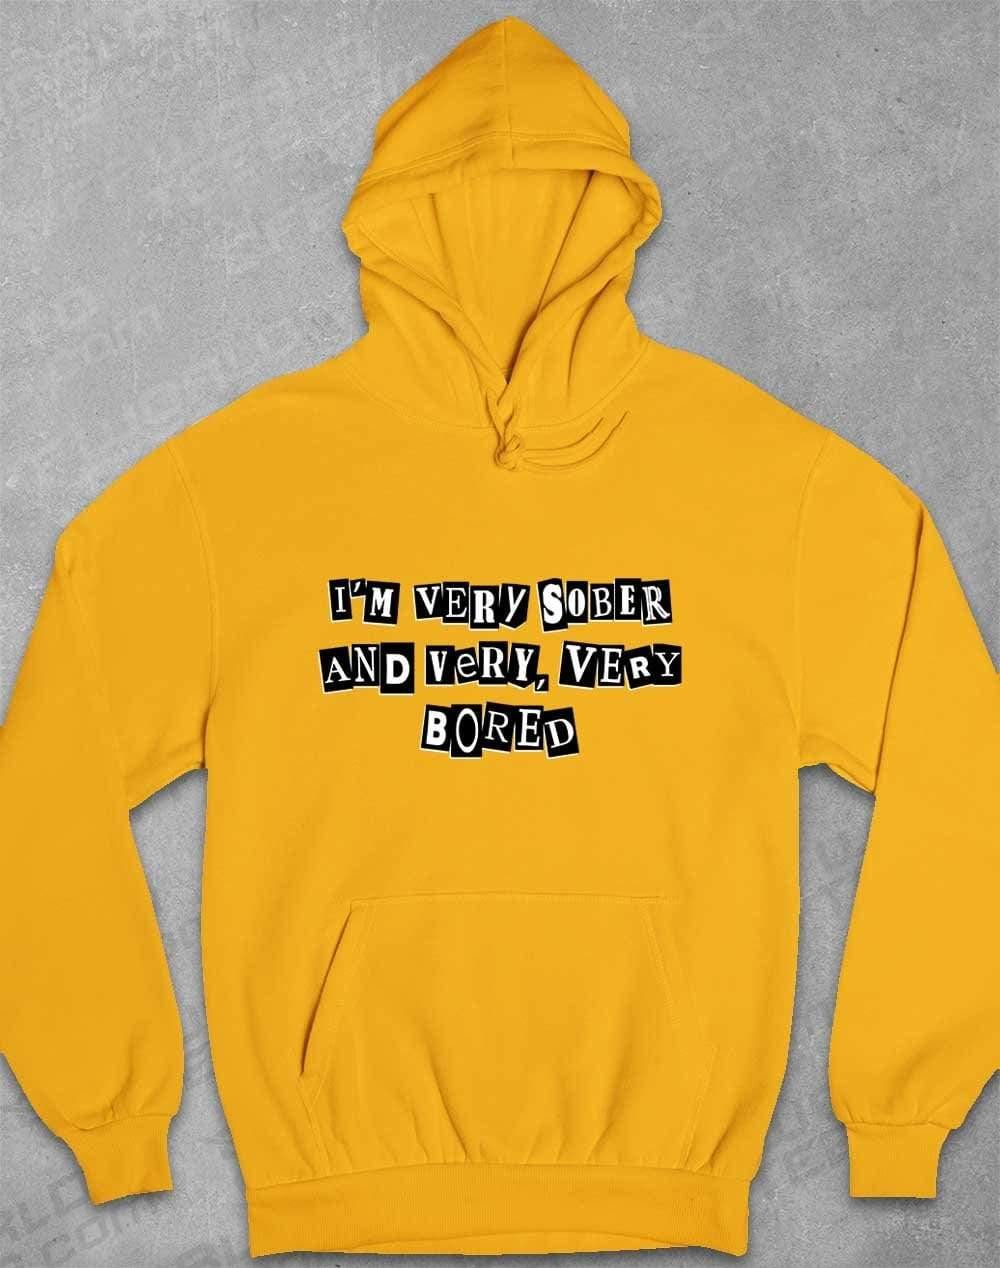 I'm Very Sober and Very Very Bored Hoodie XS / Gold  - Off World Tees